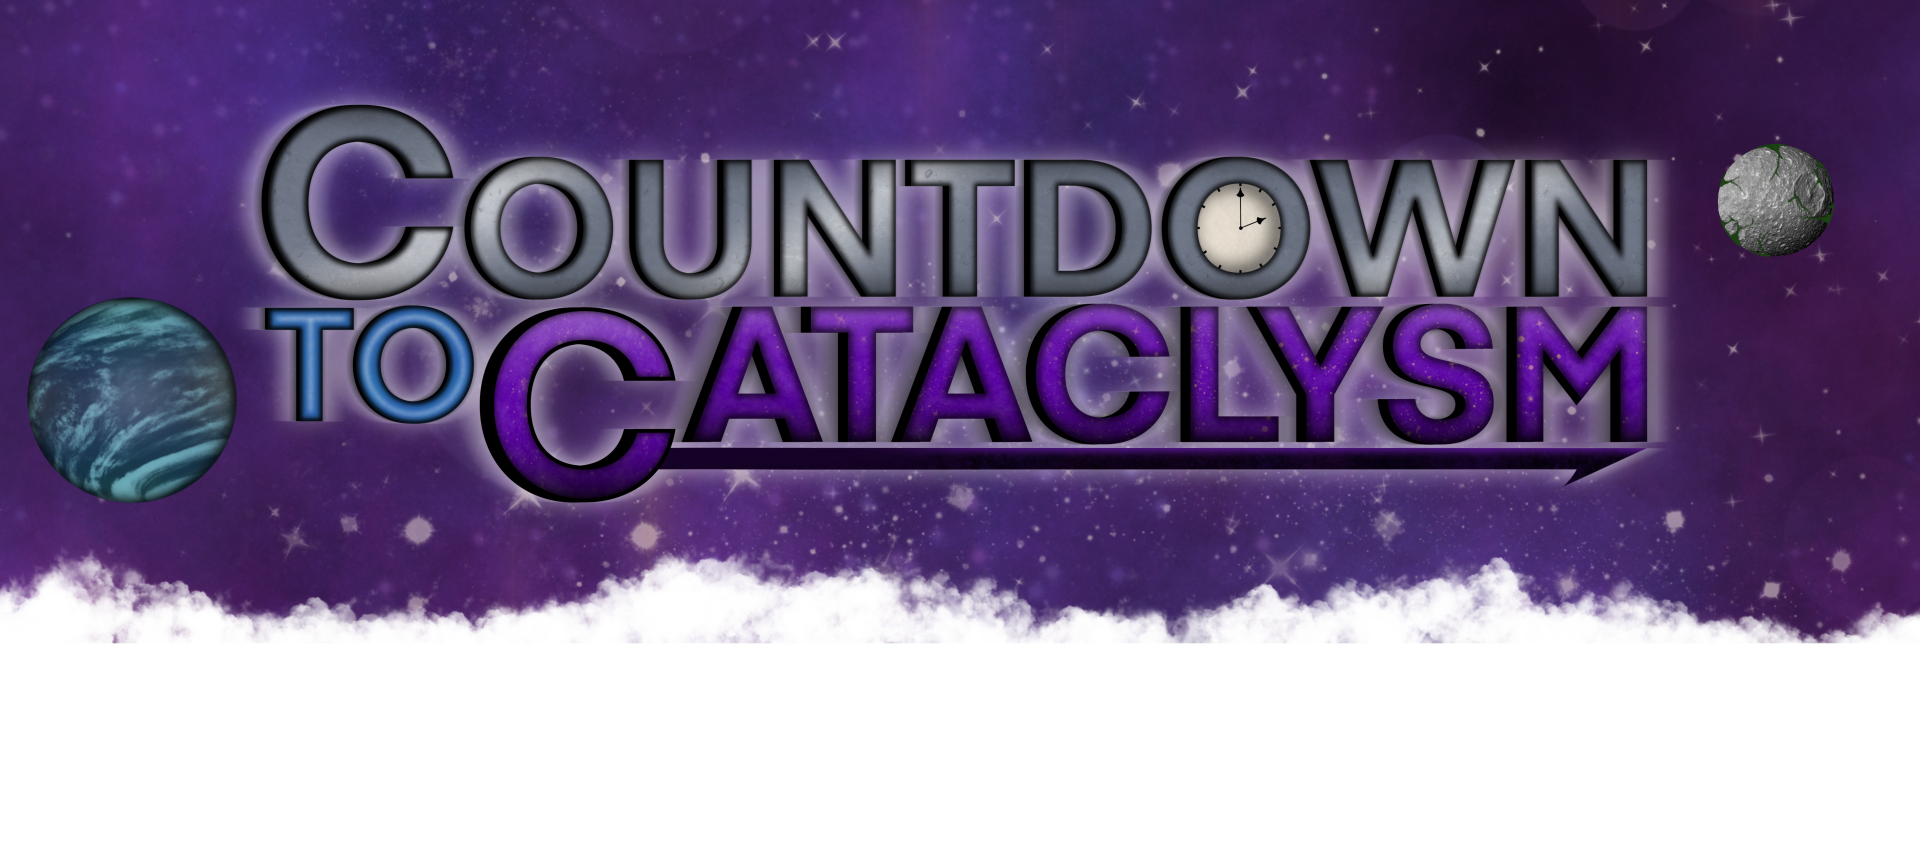 Countdown to Cataclysm